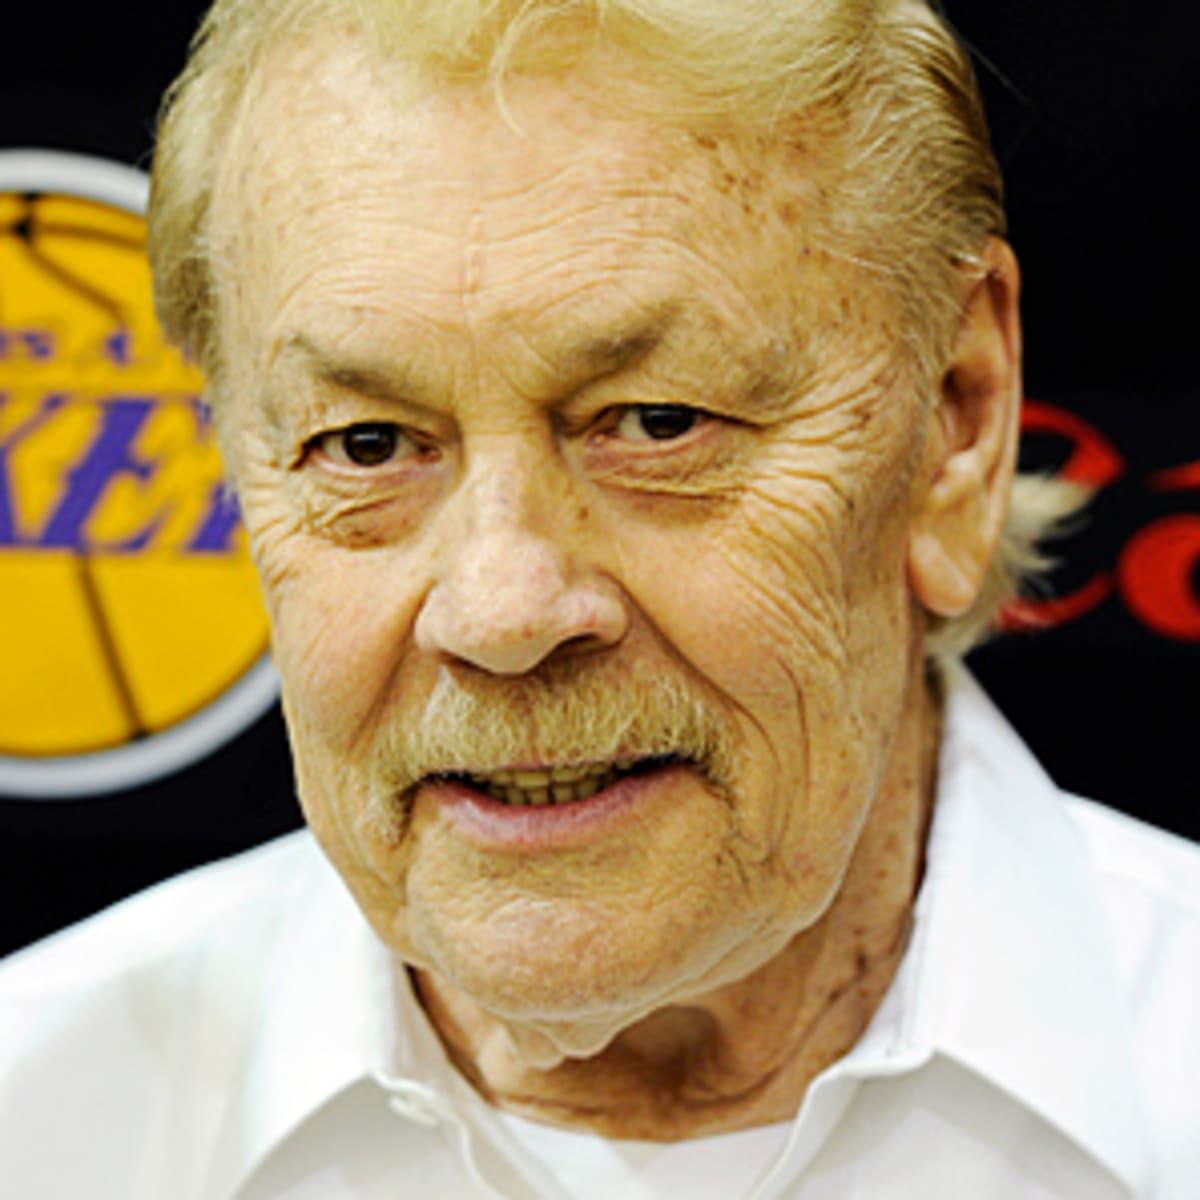 Lakers owner Jerry Buss dies at 80 - Sports Illustrated